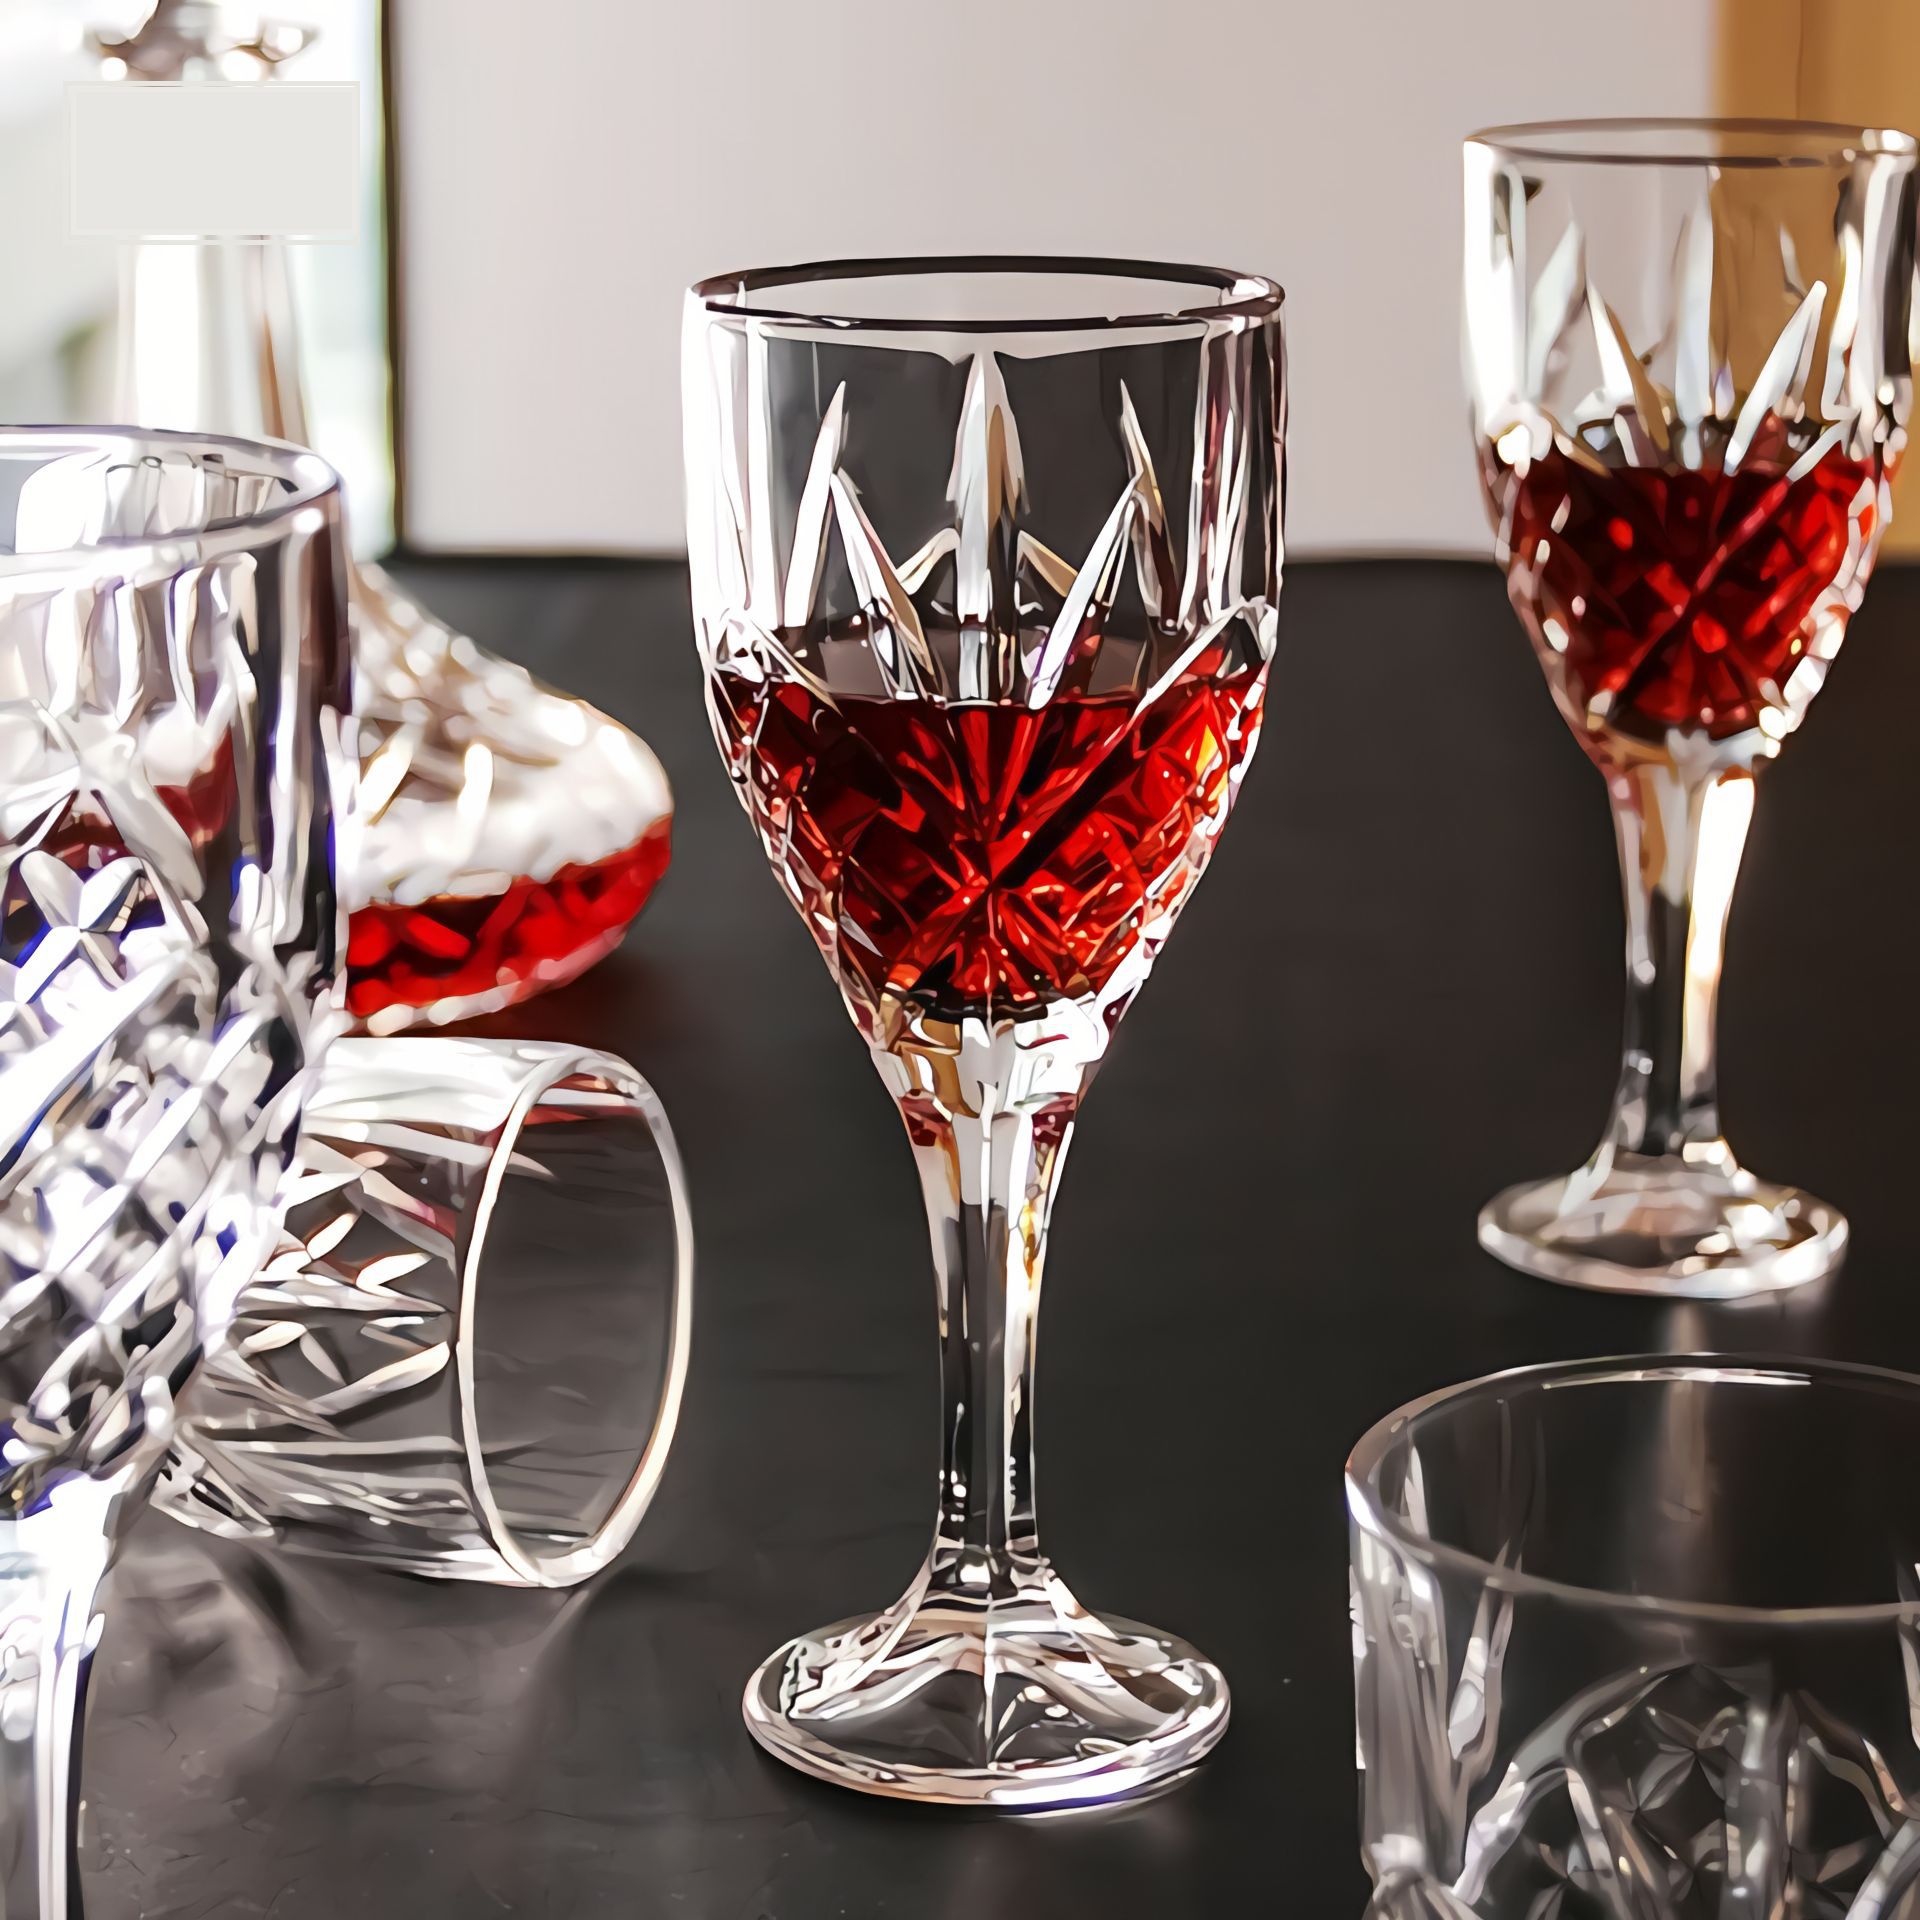 Small red wine glasses